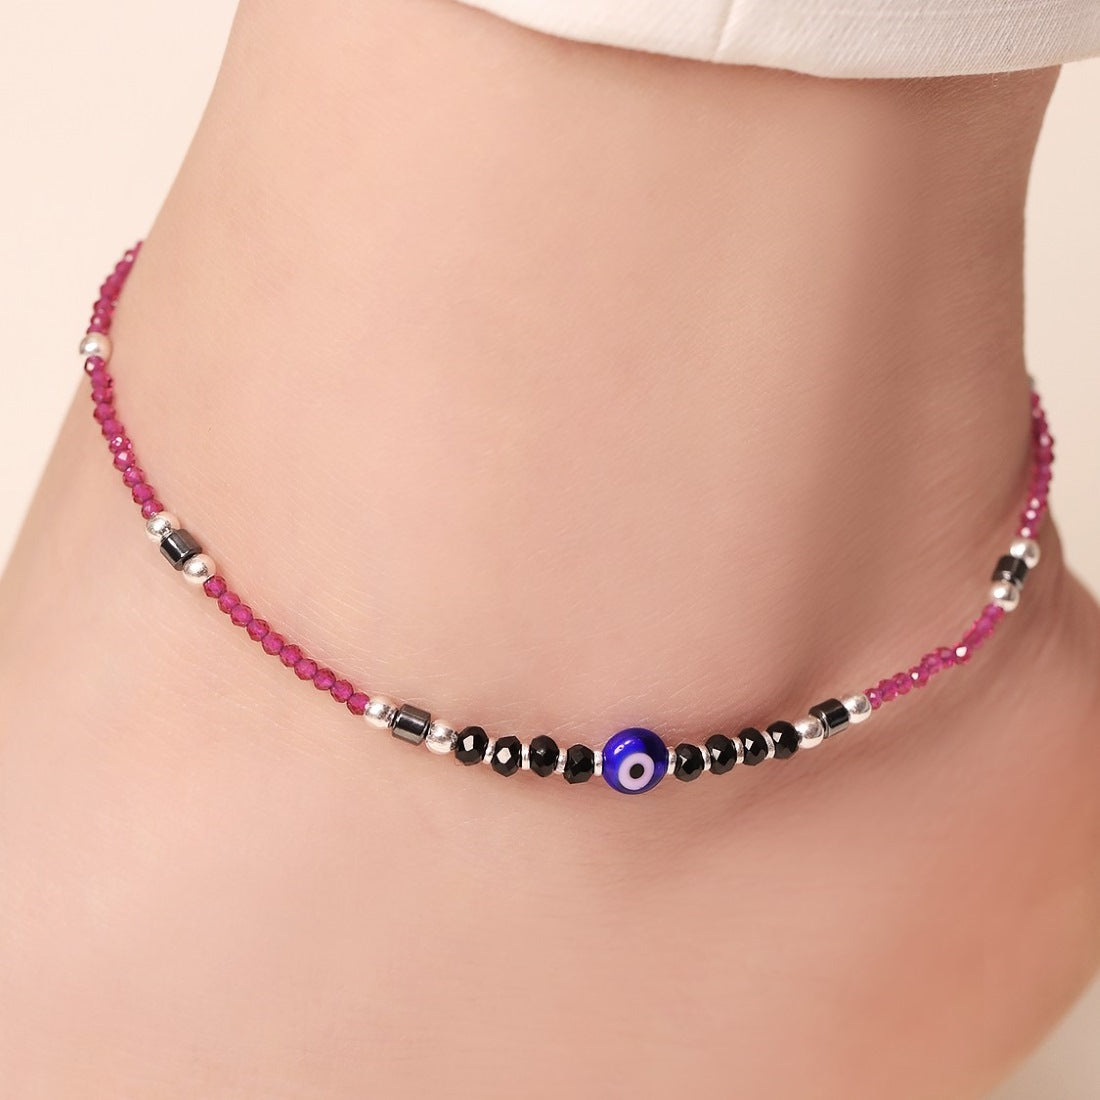 Guardian Gleam 925 Sterling Silver Rhodium-Plated Evil Eye Anklet